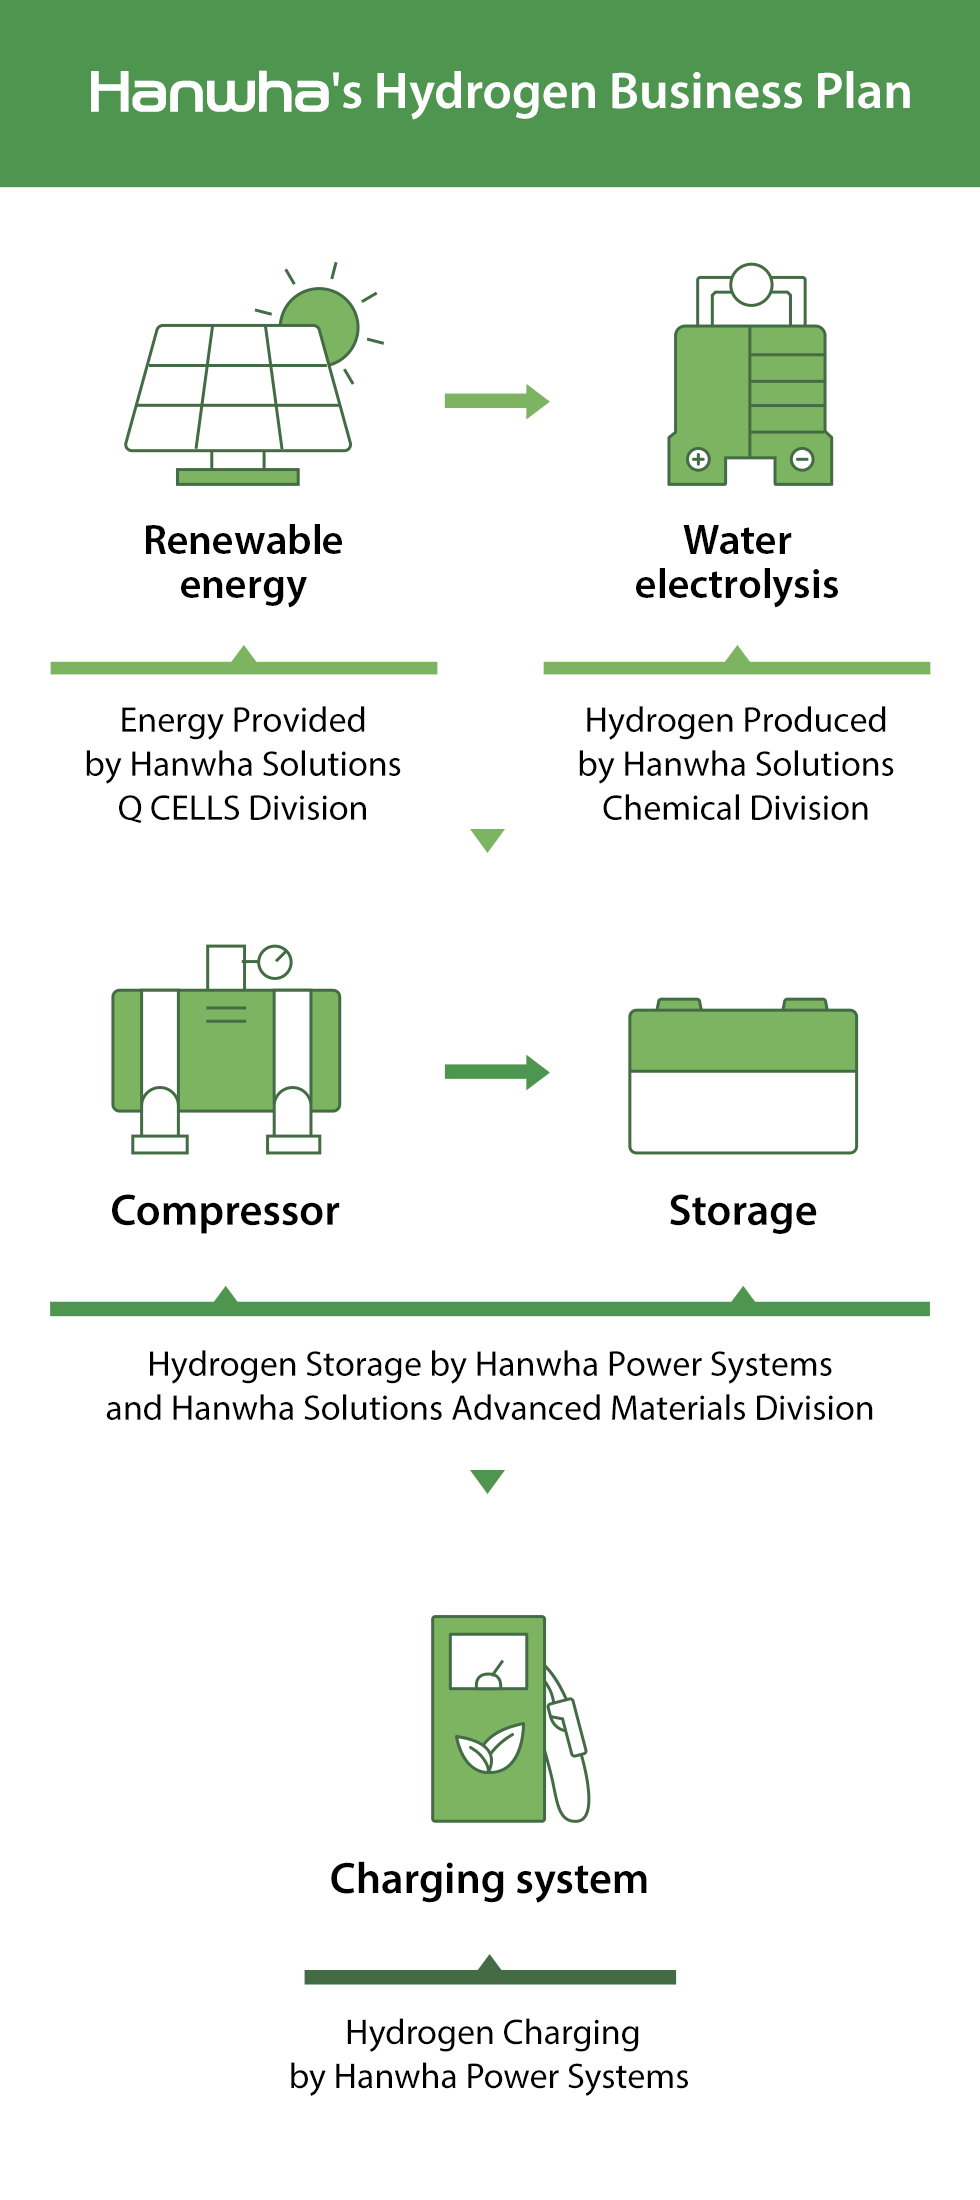 Hanwha's hydrogen business plan aims to fight climate change and greenhouse gas emissions with this smart new energy choice